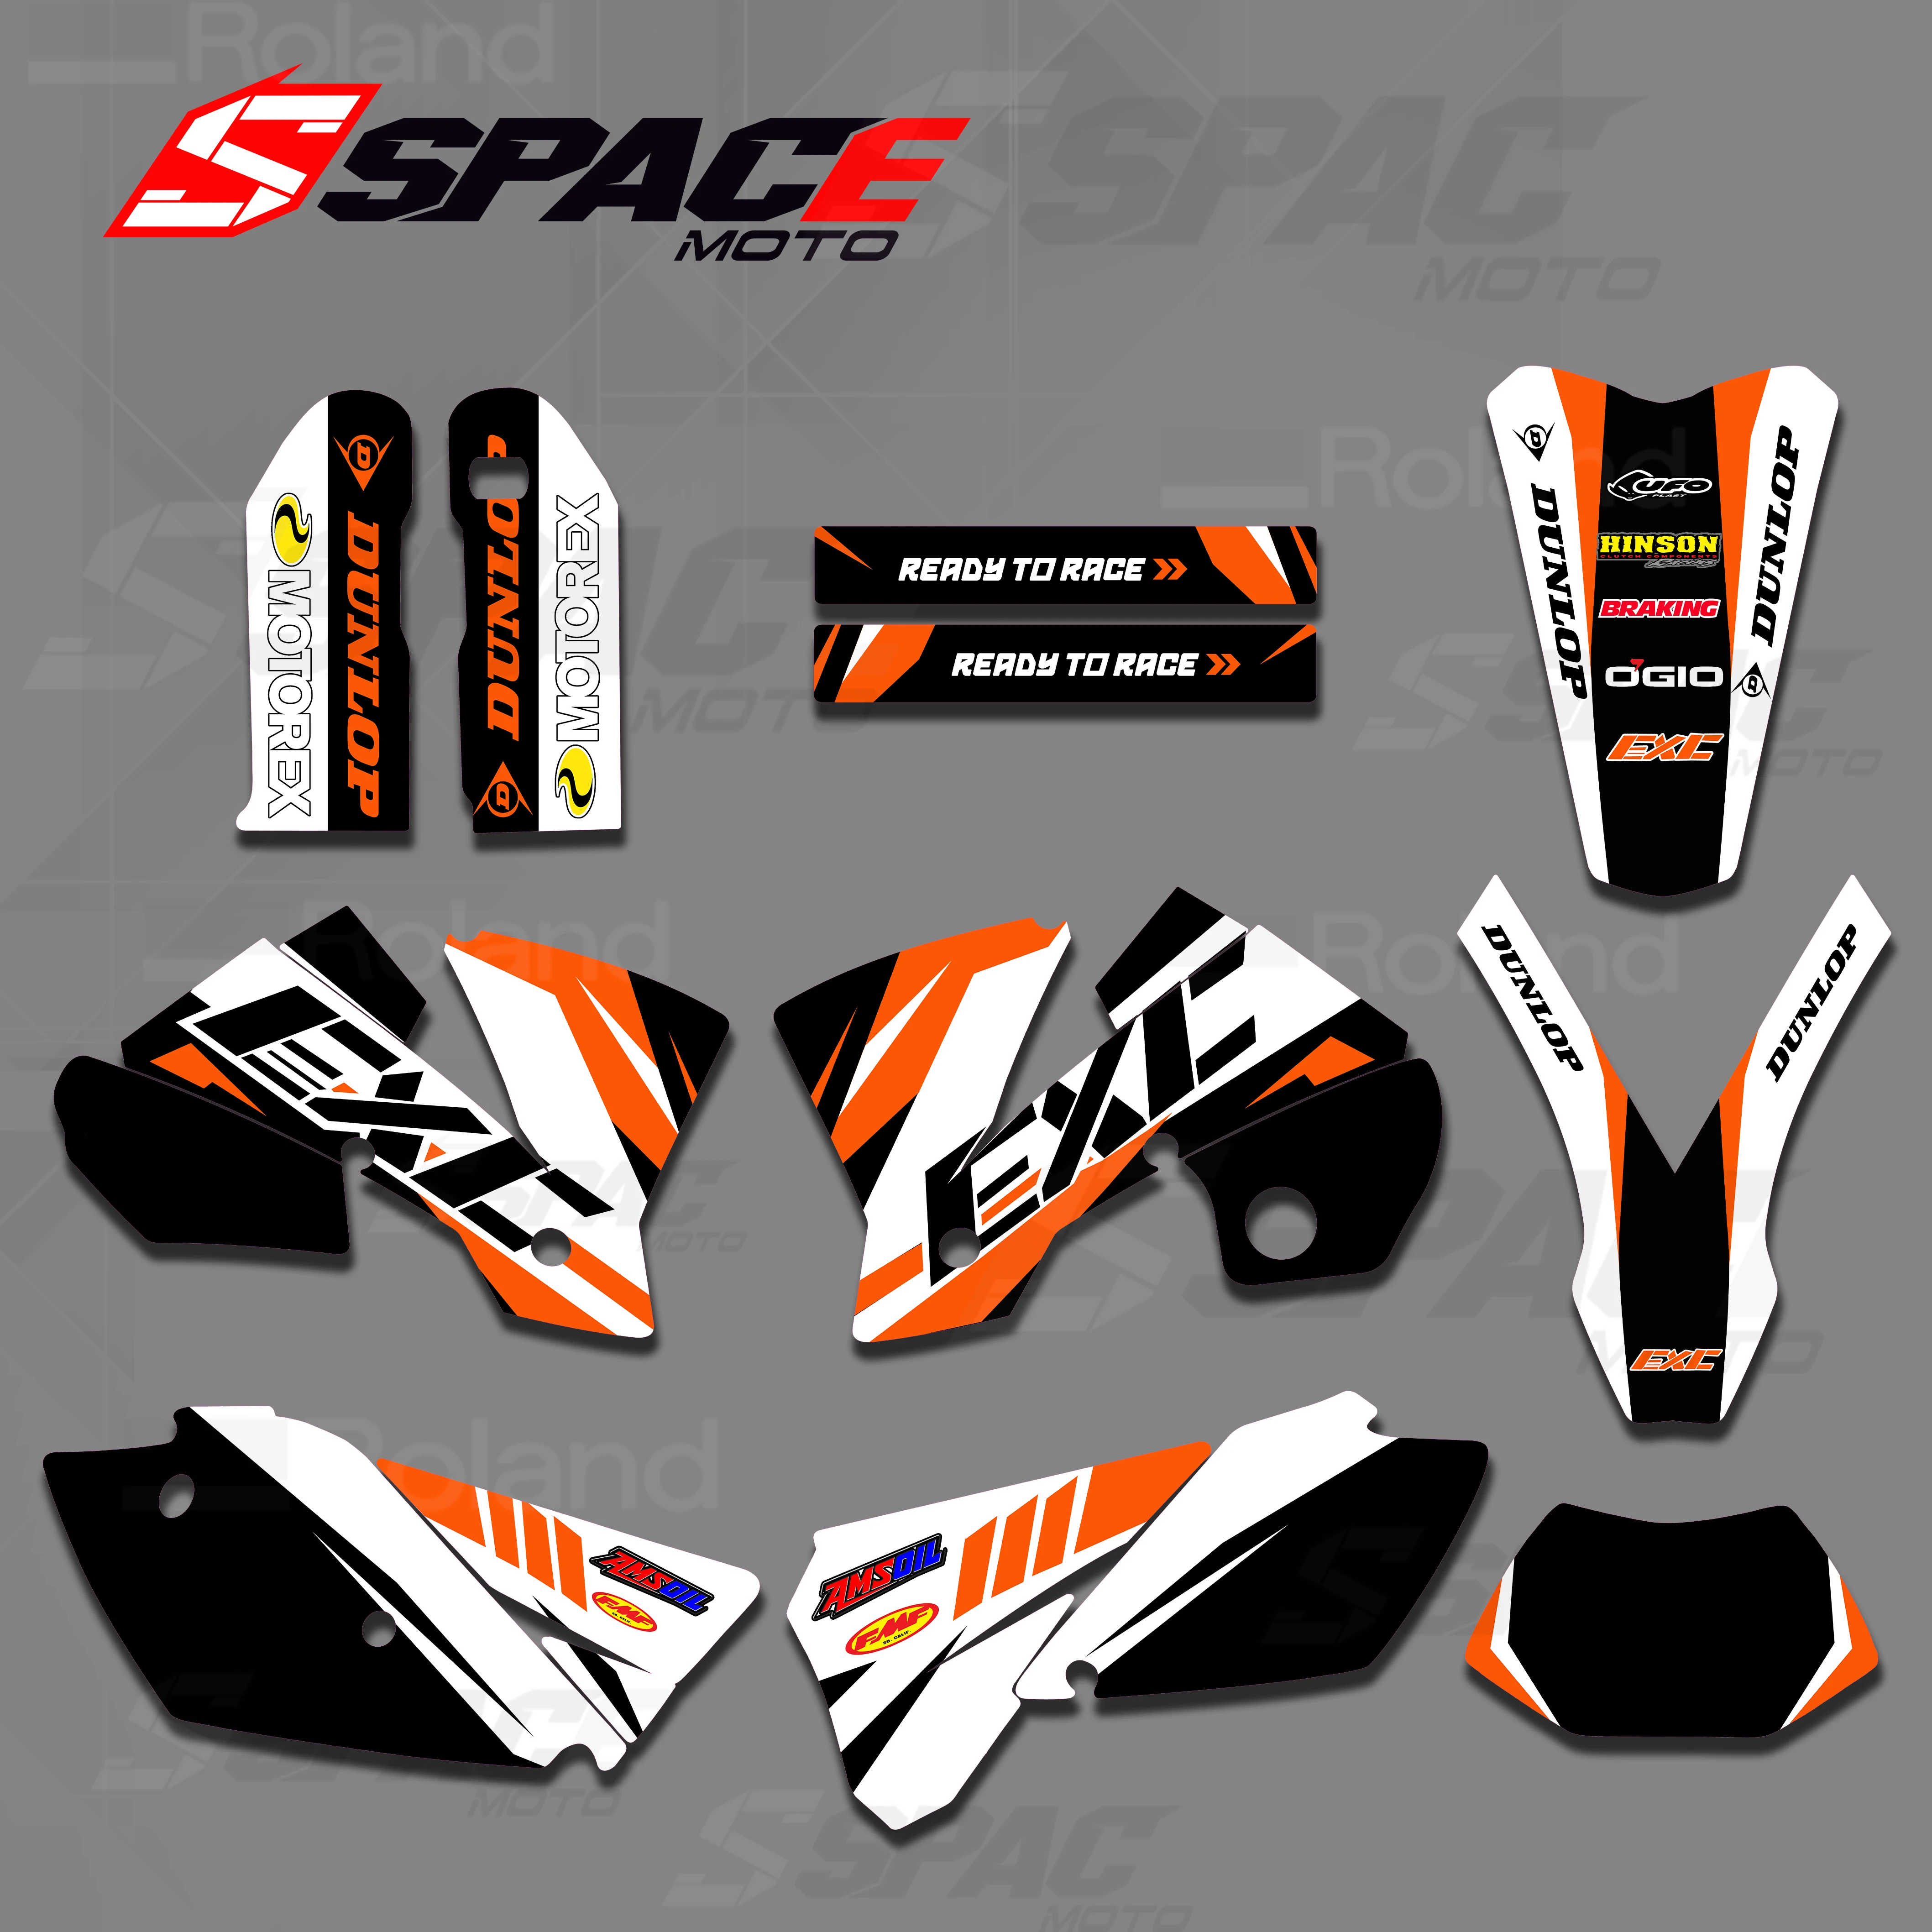 SPACE New team graphics background sticker decal for ktm exc 125 200 250 300 400 450 525 2004 motorcycle decoration accessorie